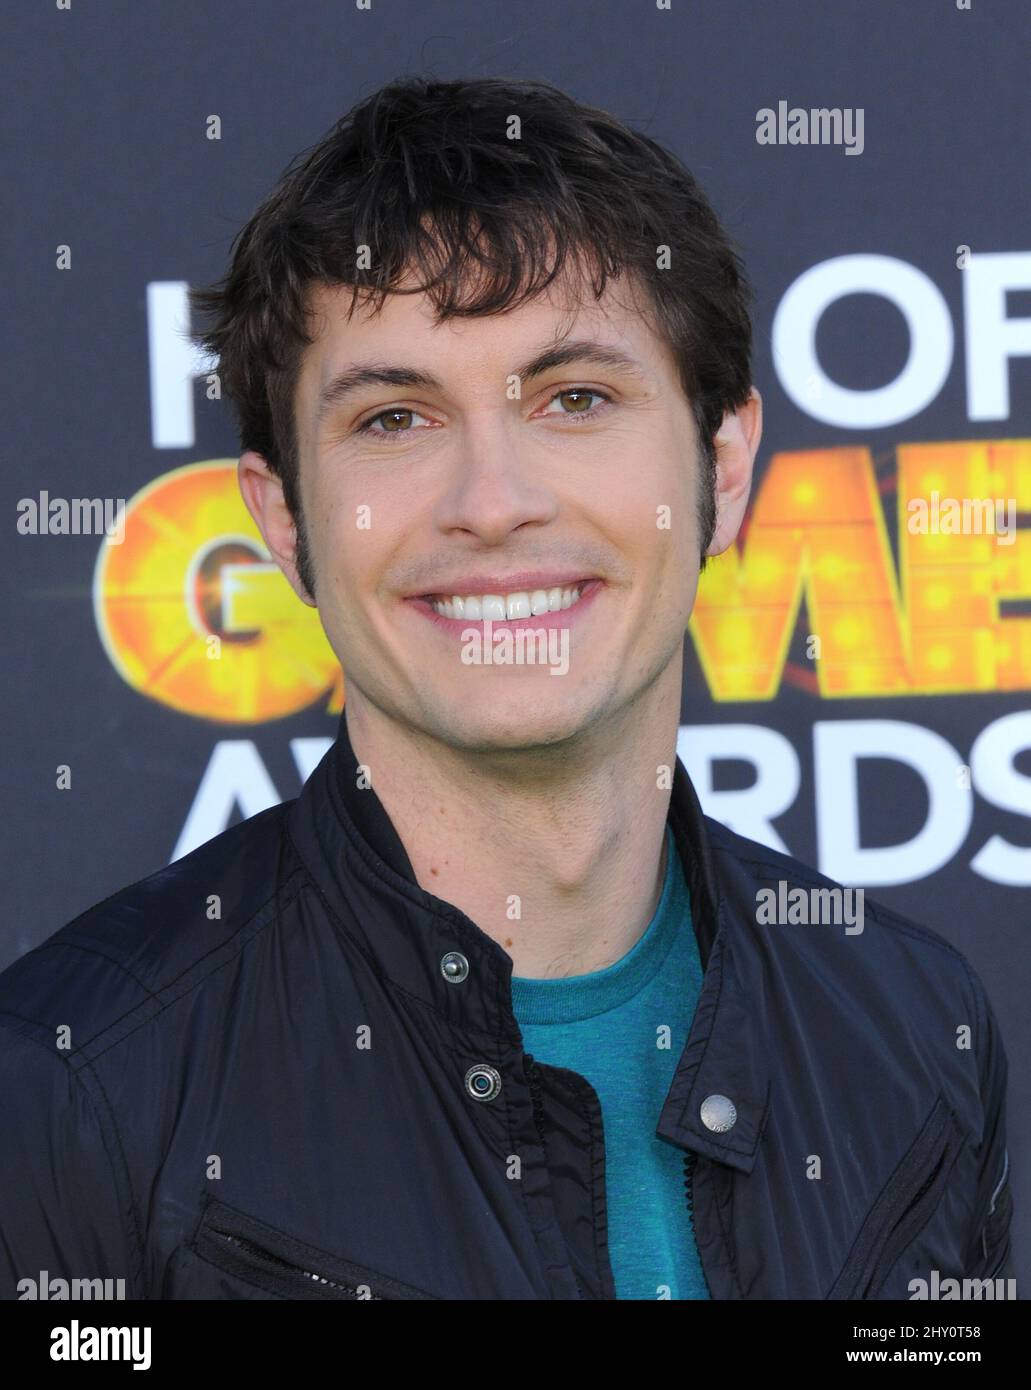 Toby Turner attending the 3rd Annual Hall of Game Awards at Barker Hanger in Santa Monica, USA. Stock Photo